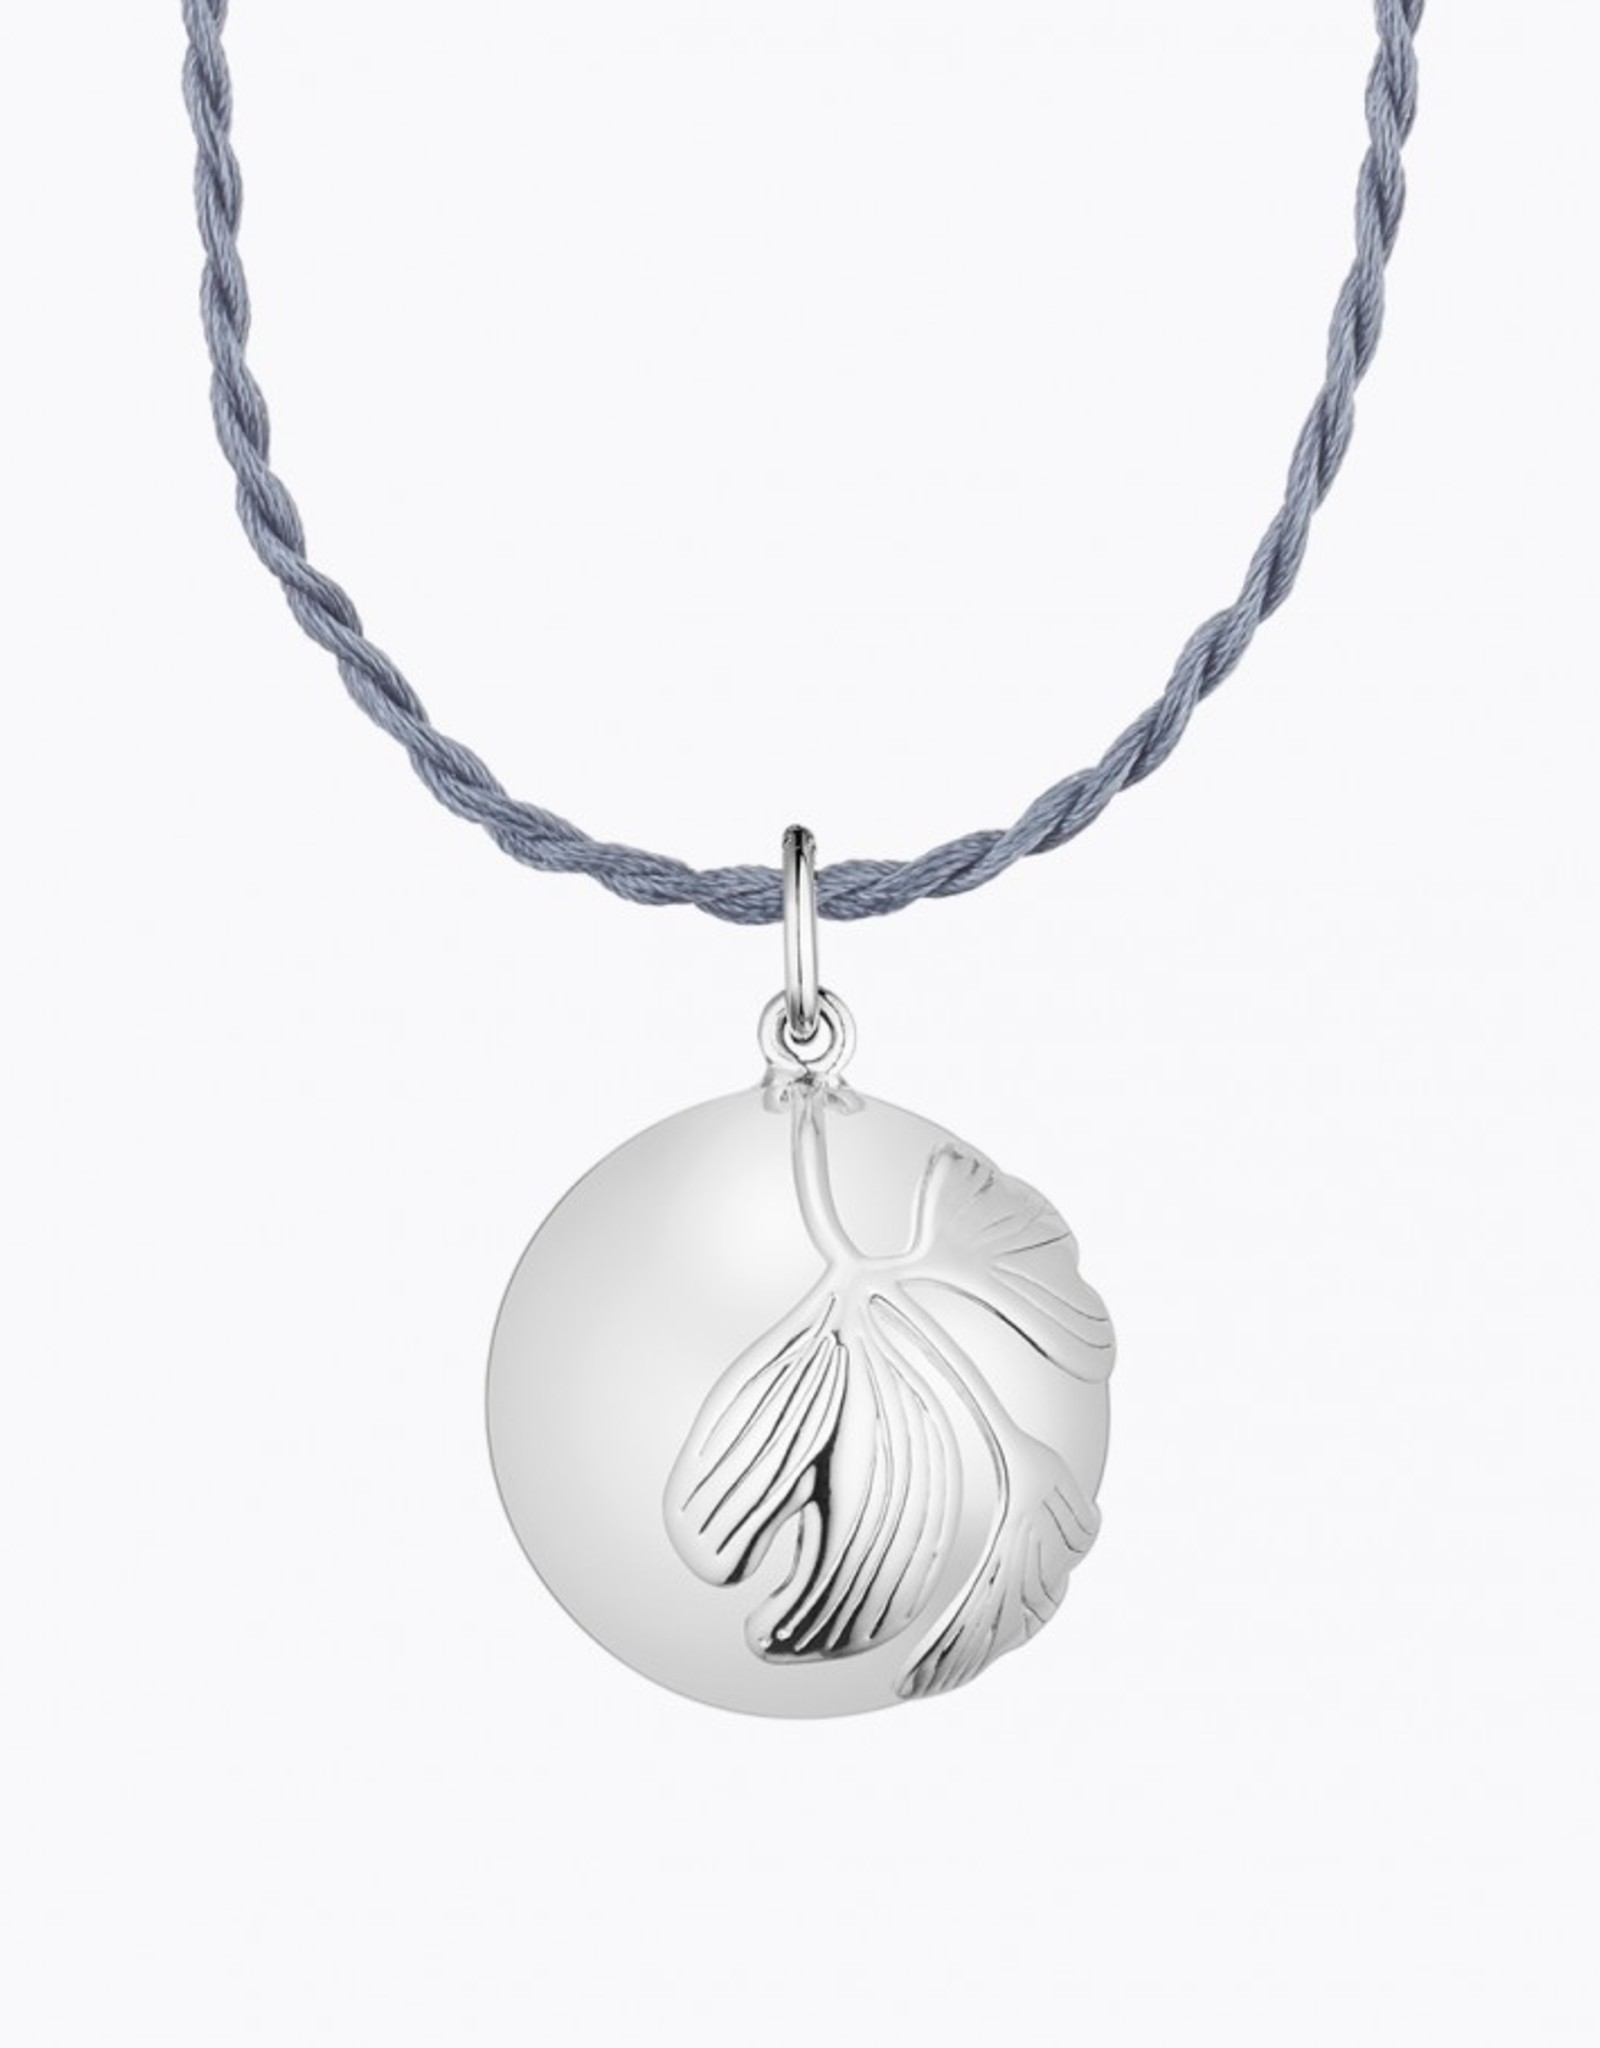 Ilado Ginkgo maternity necklace with chain